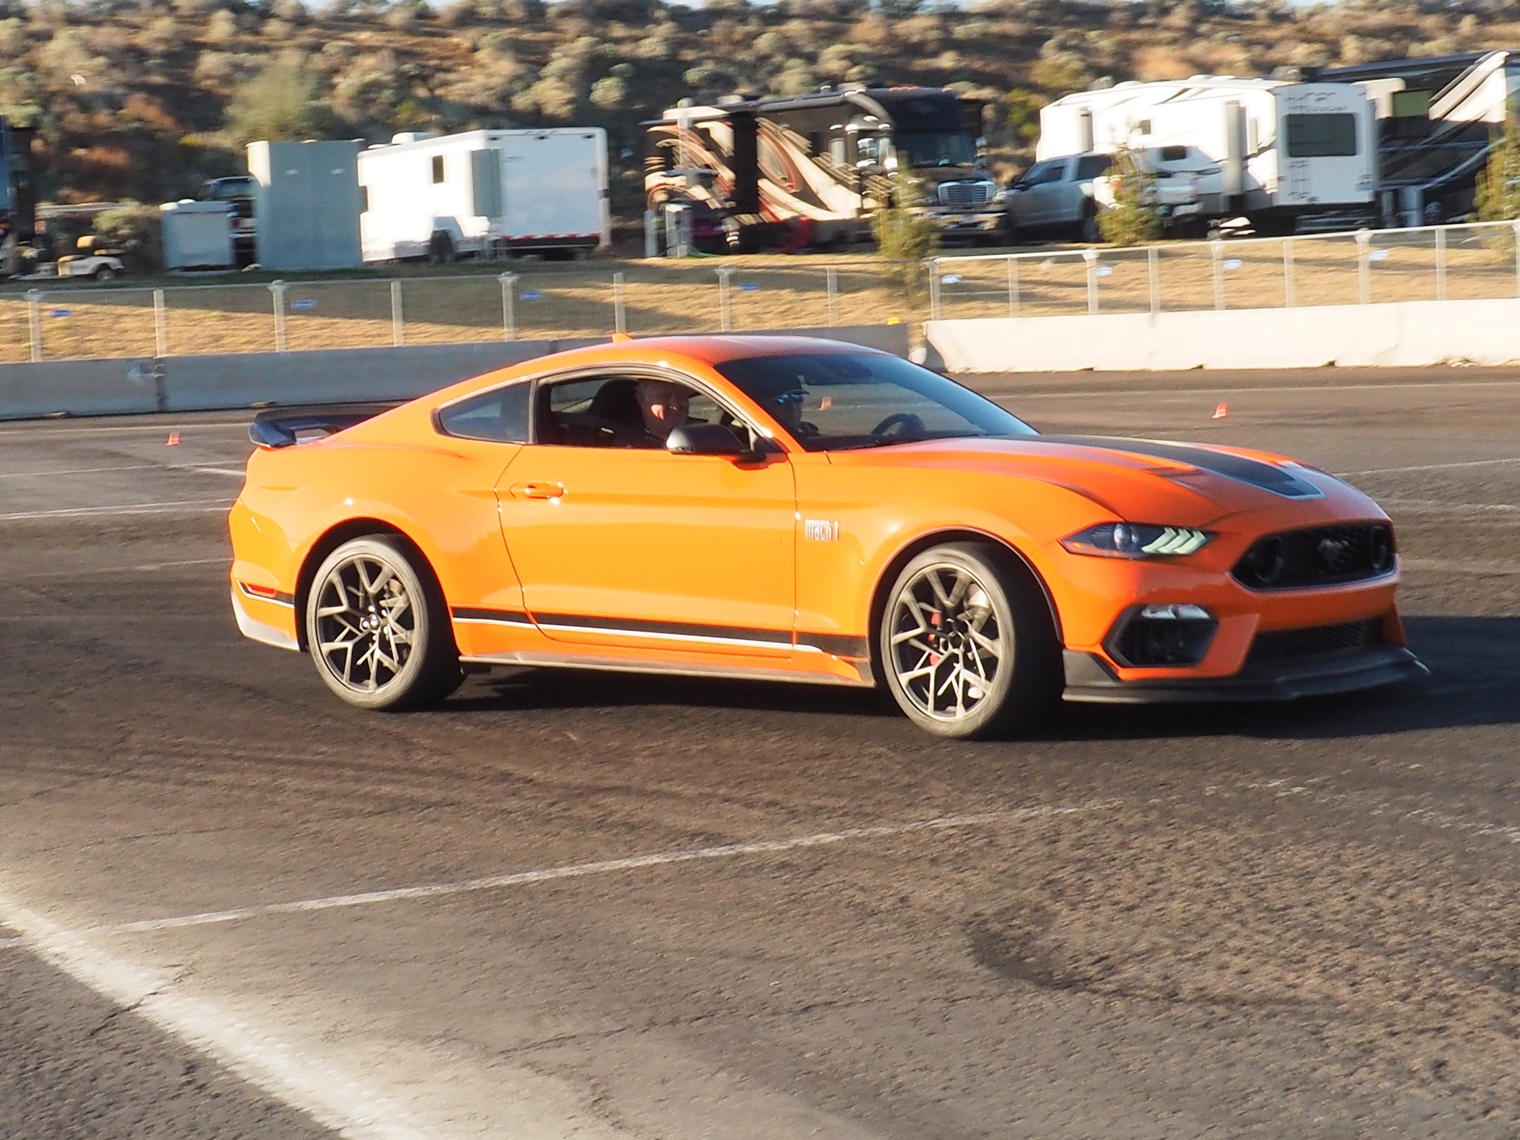 2021 Mustang Mach 1 on track